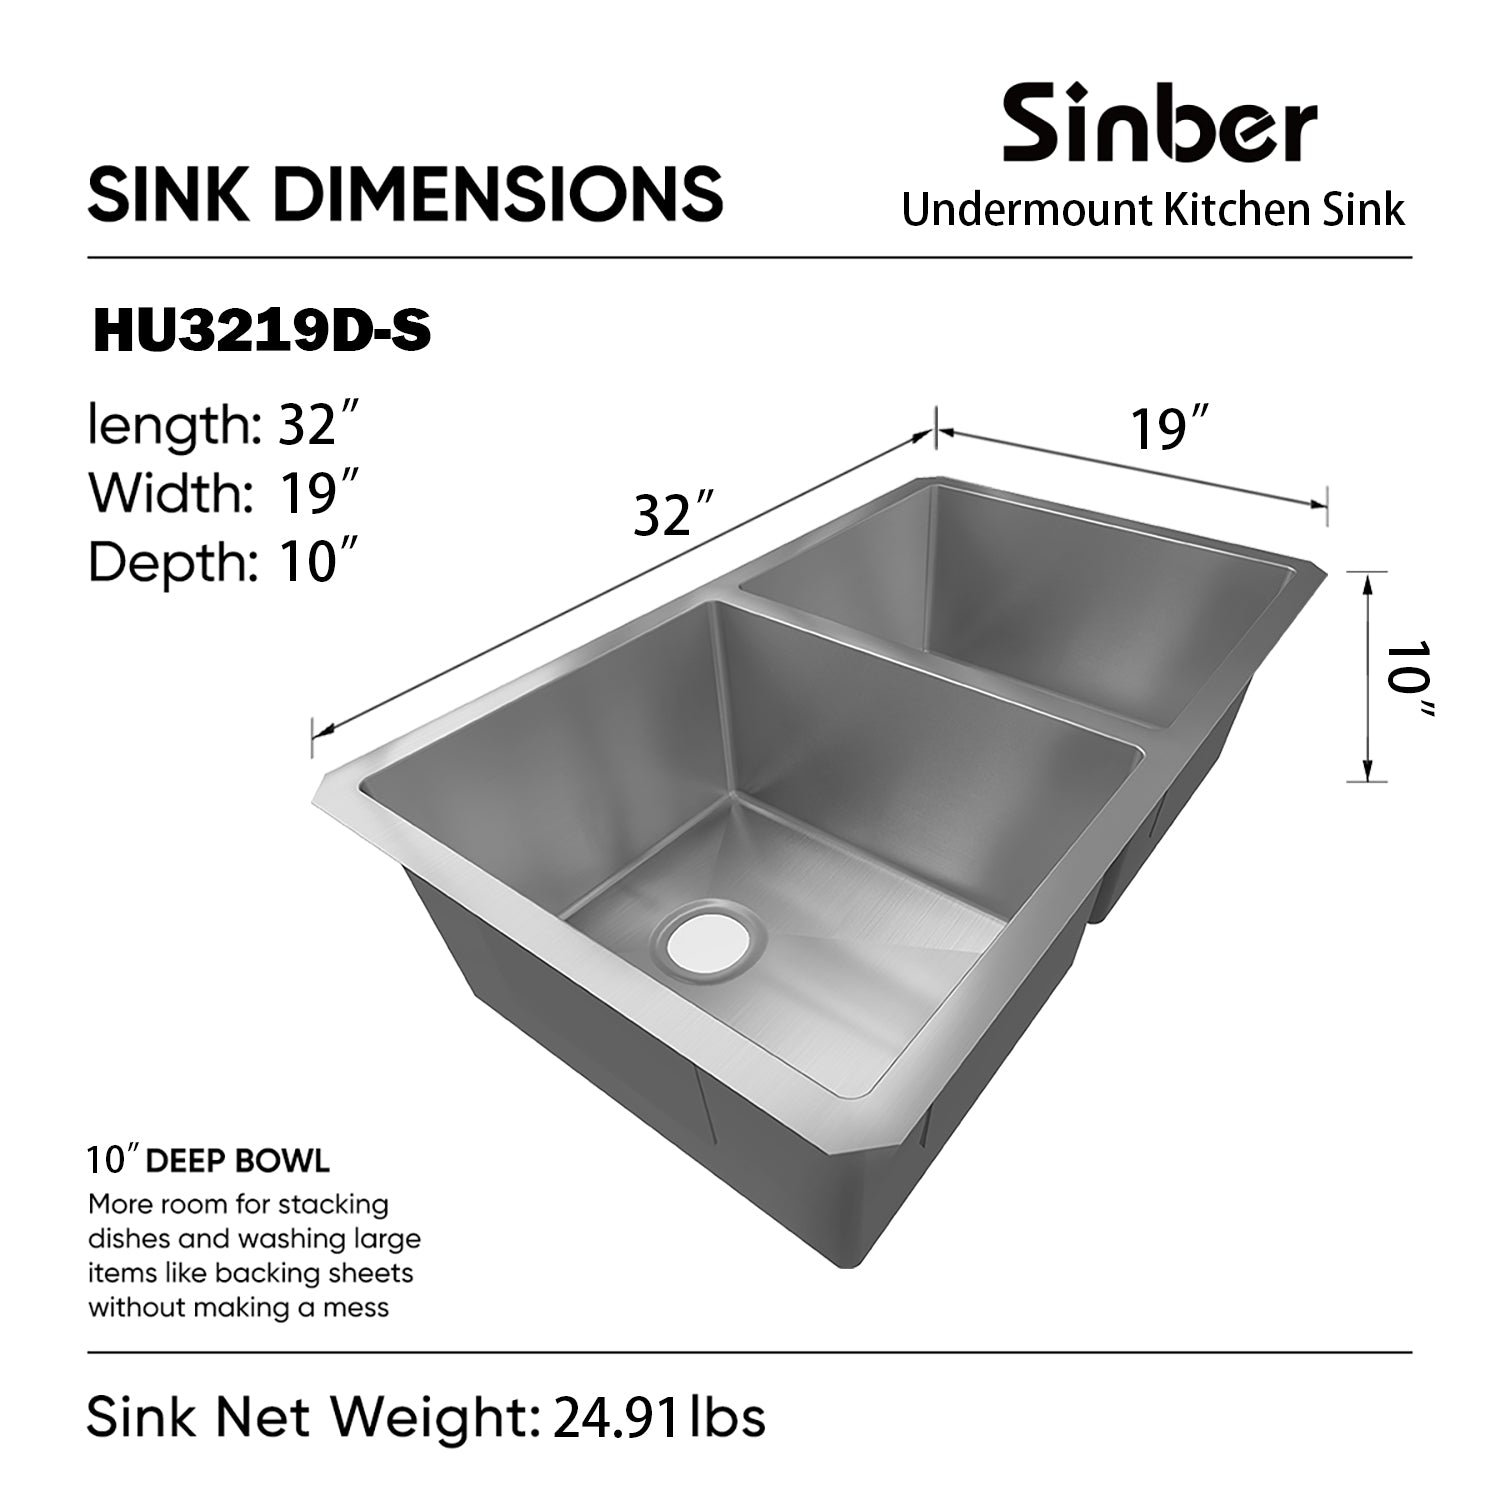 Sinber 32" x 19" x 10" Undermount Double Bowl Kitchen Sink with 304 Stainless Steel Satin Finish